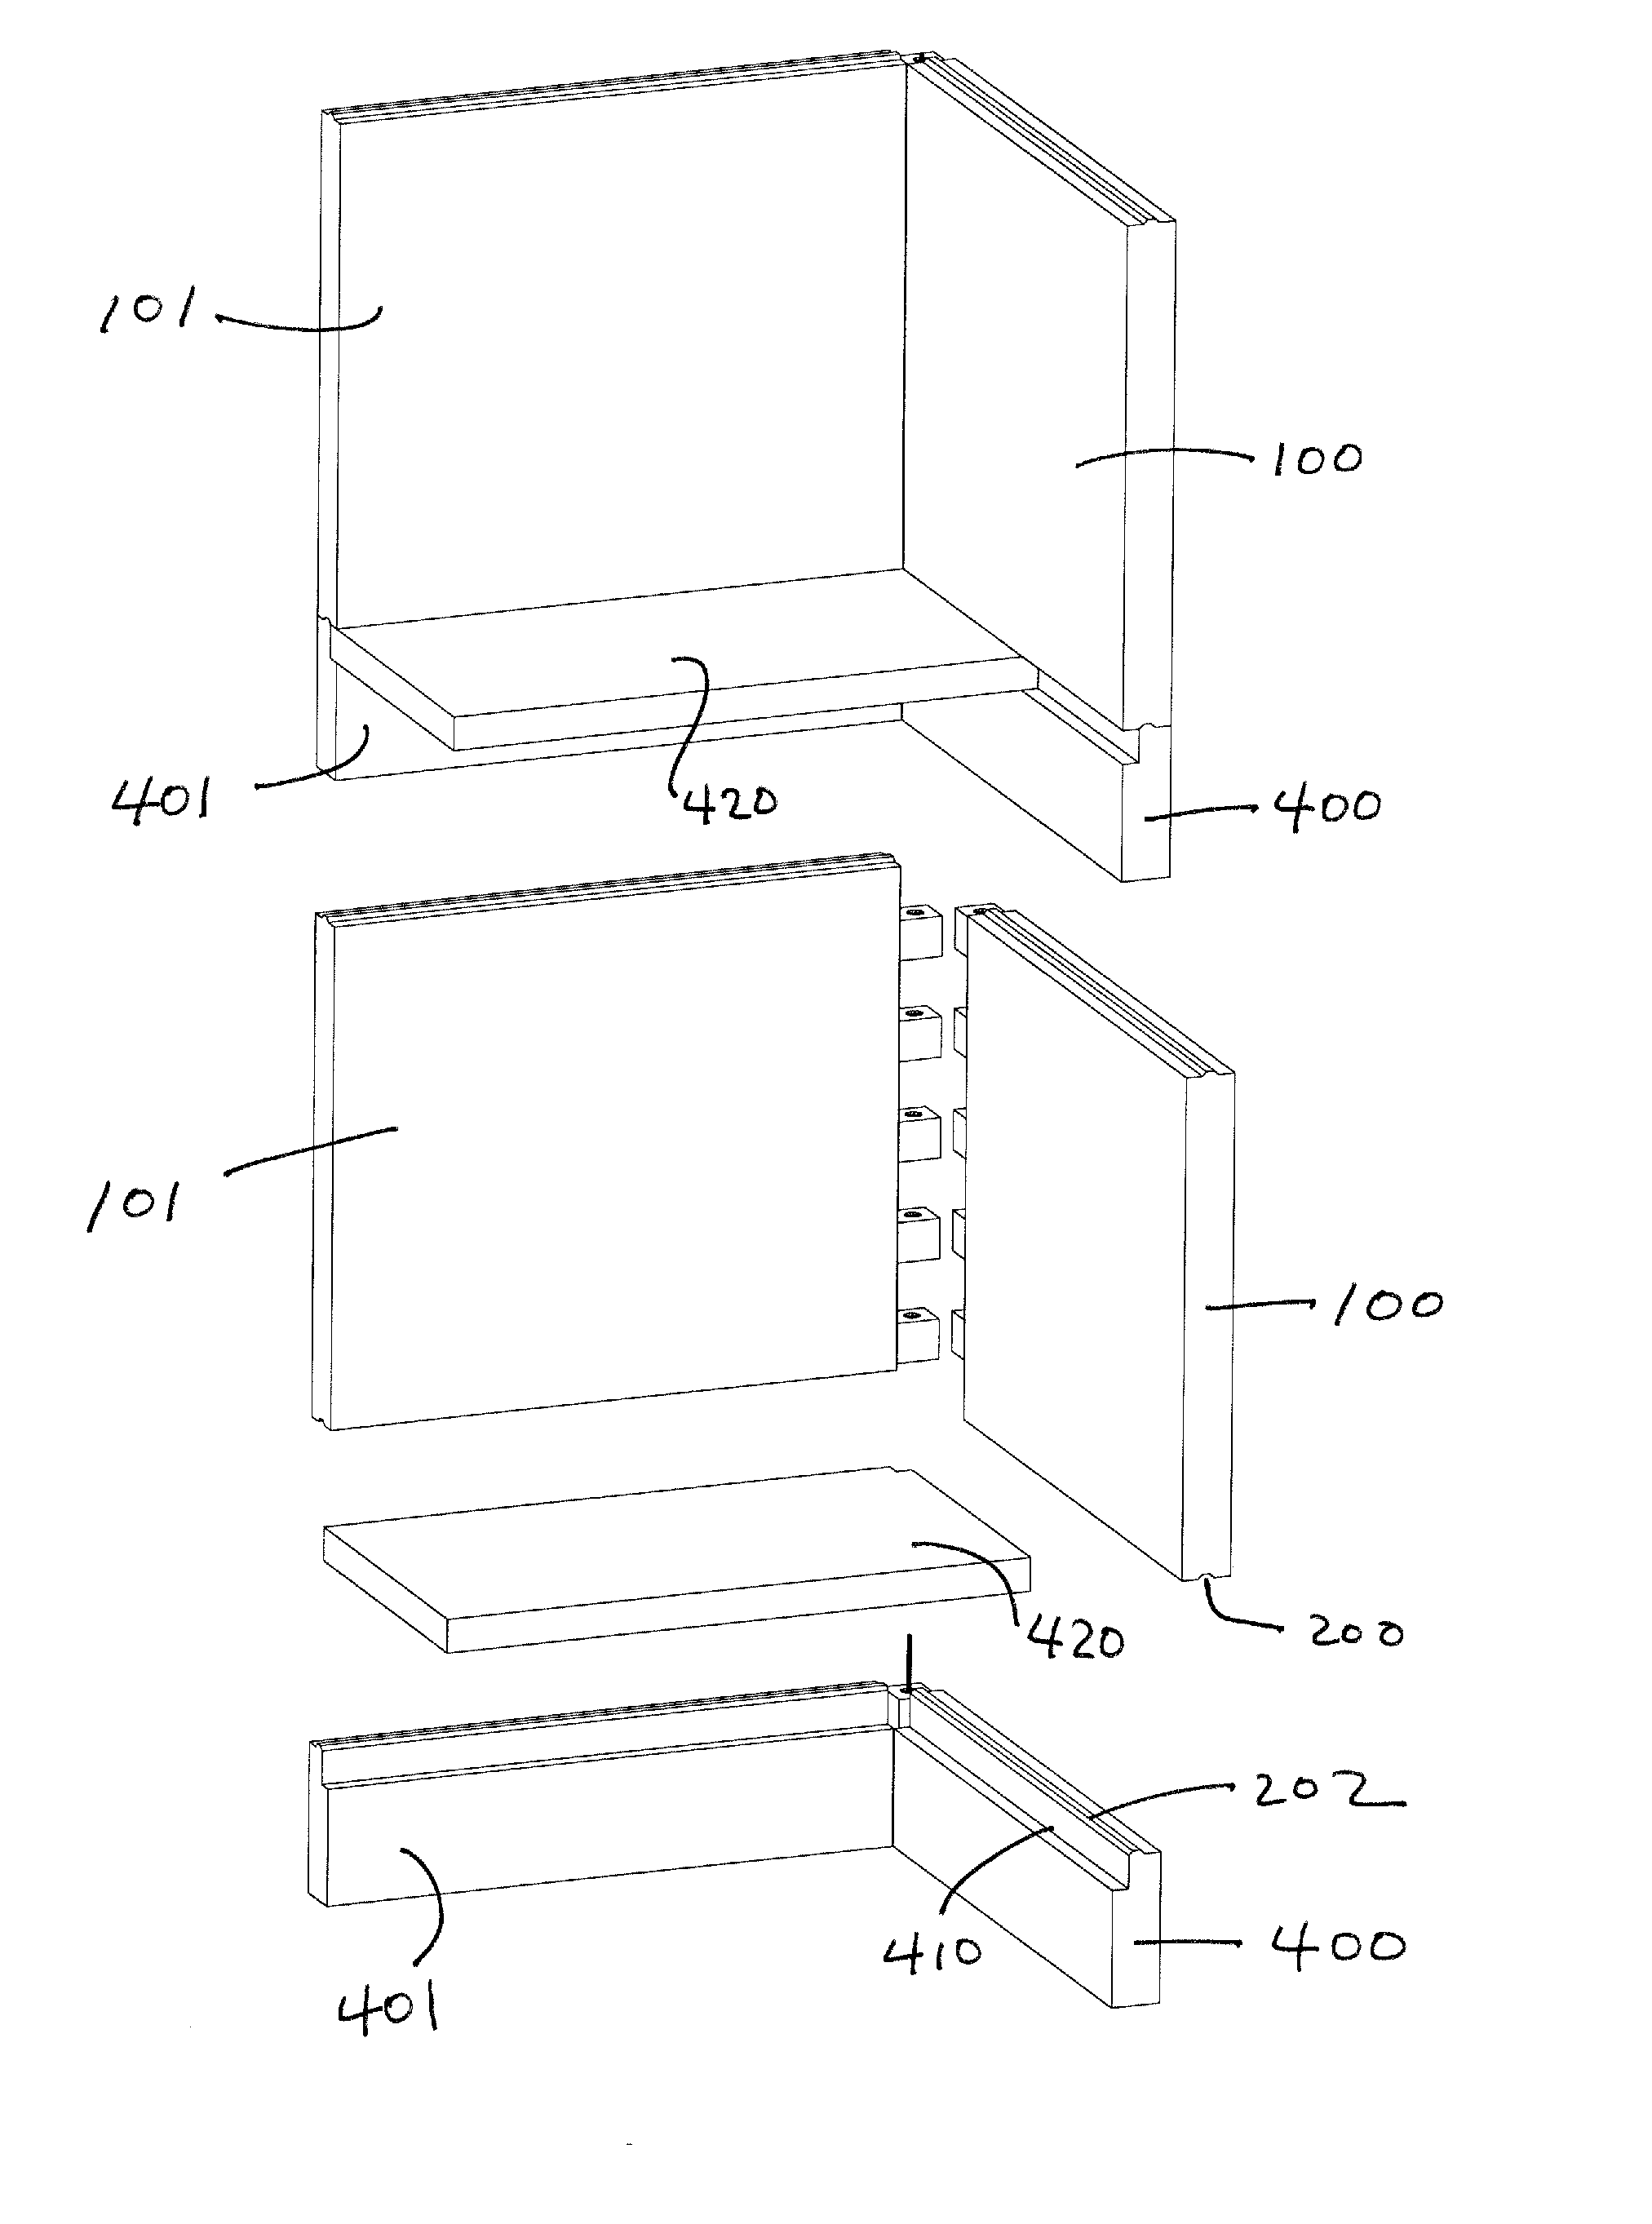 Method and apparatus for precast wall and floor block system